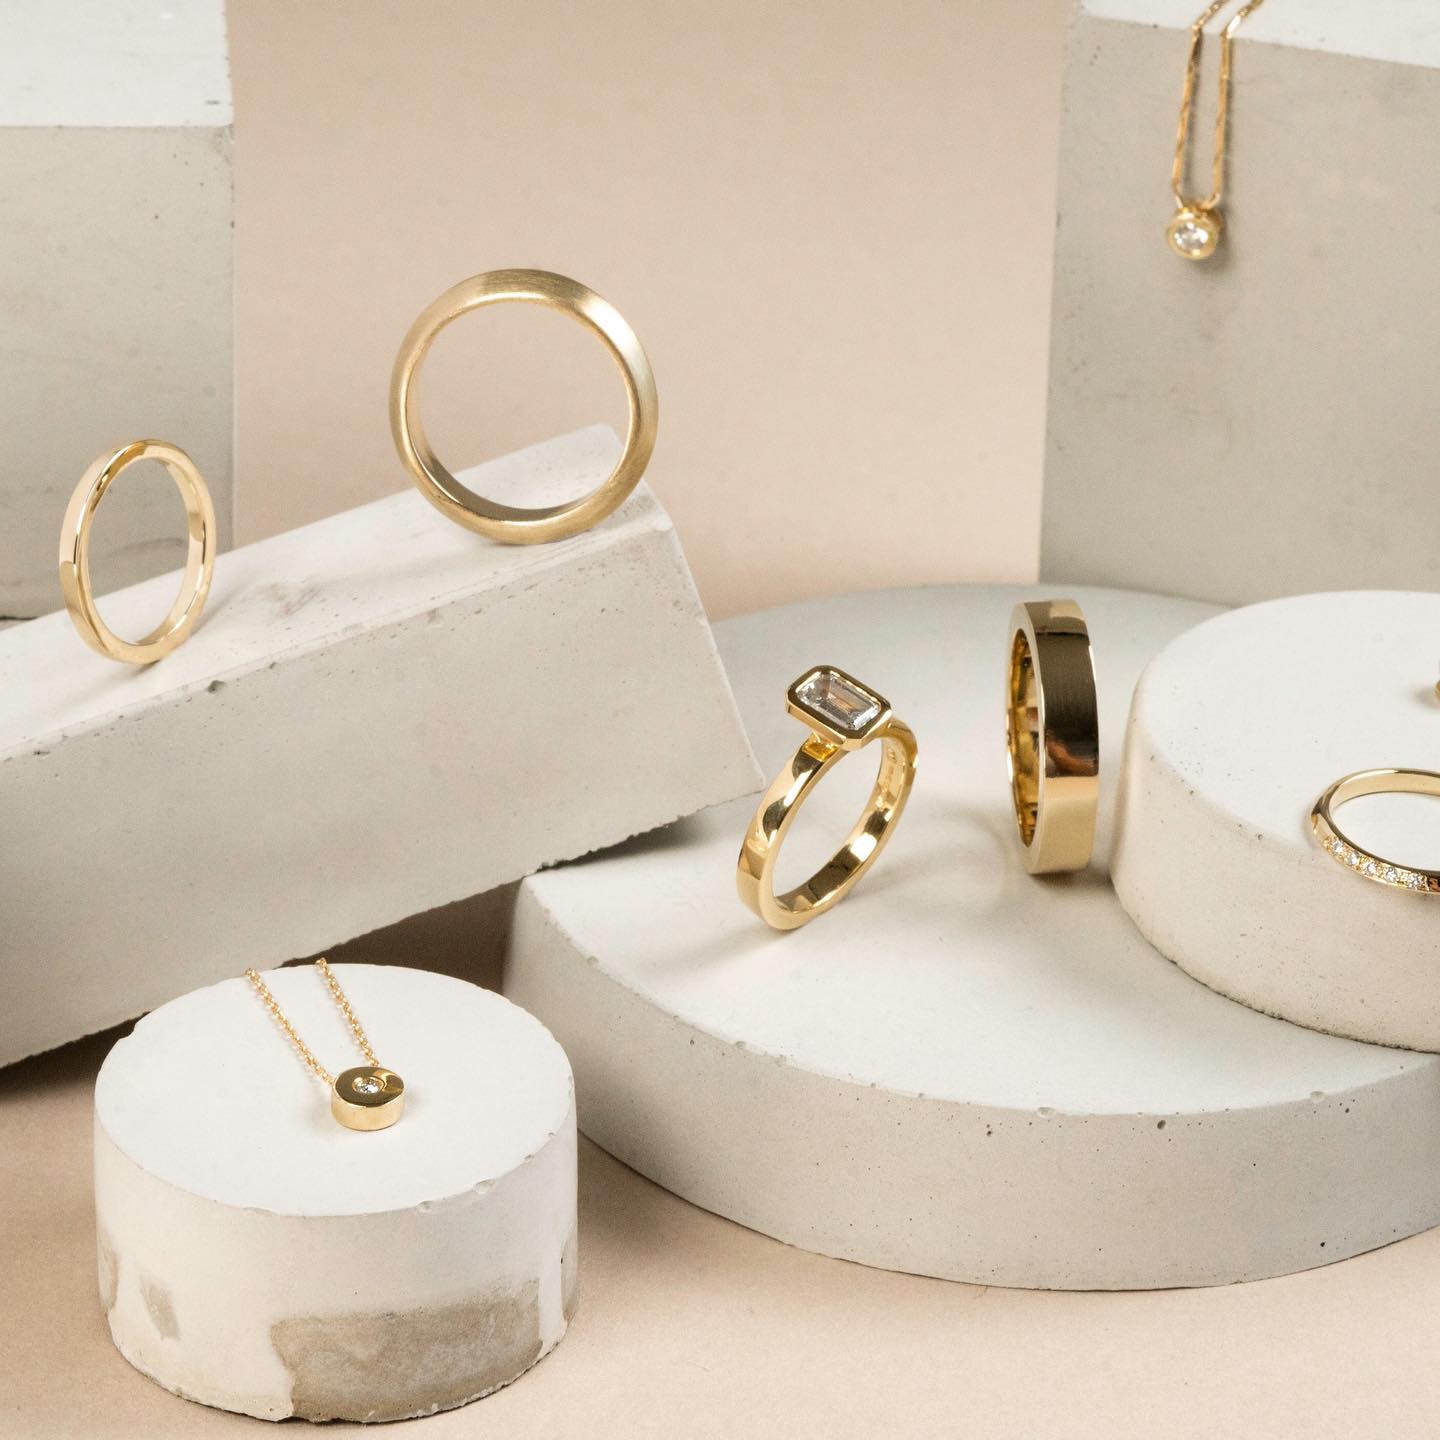 Ethical Jewelry Certifications You Need To Know - Eluxe Magazine